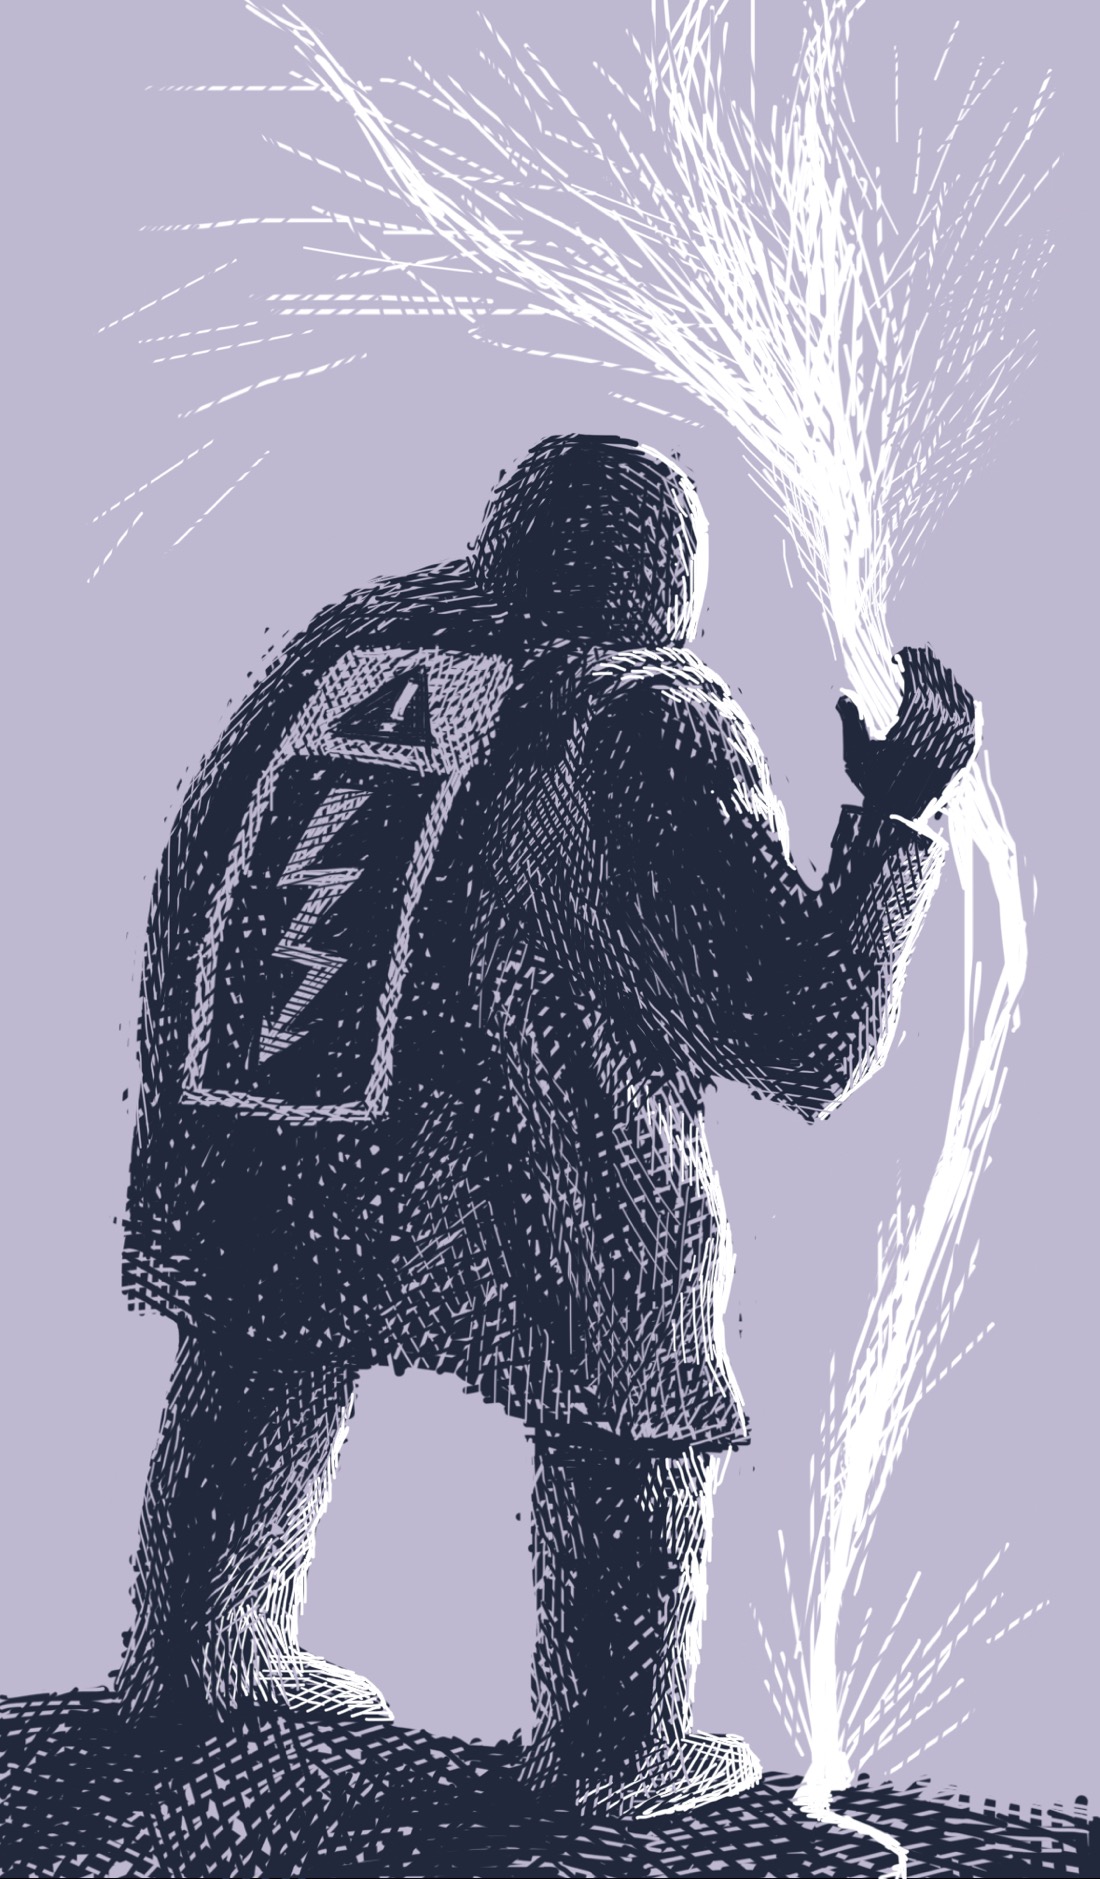 A figure stands with its back to the viewer. On the back of the figure's shirt is a high-voltage symbol. The figure is clutching a spitting arc of electricity that is leaping up from the ground as though it's a fountain.